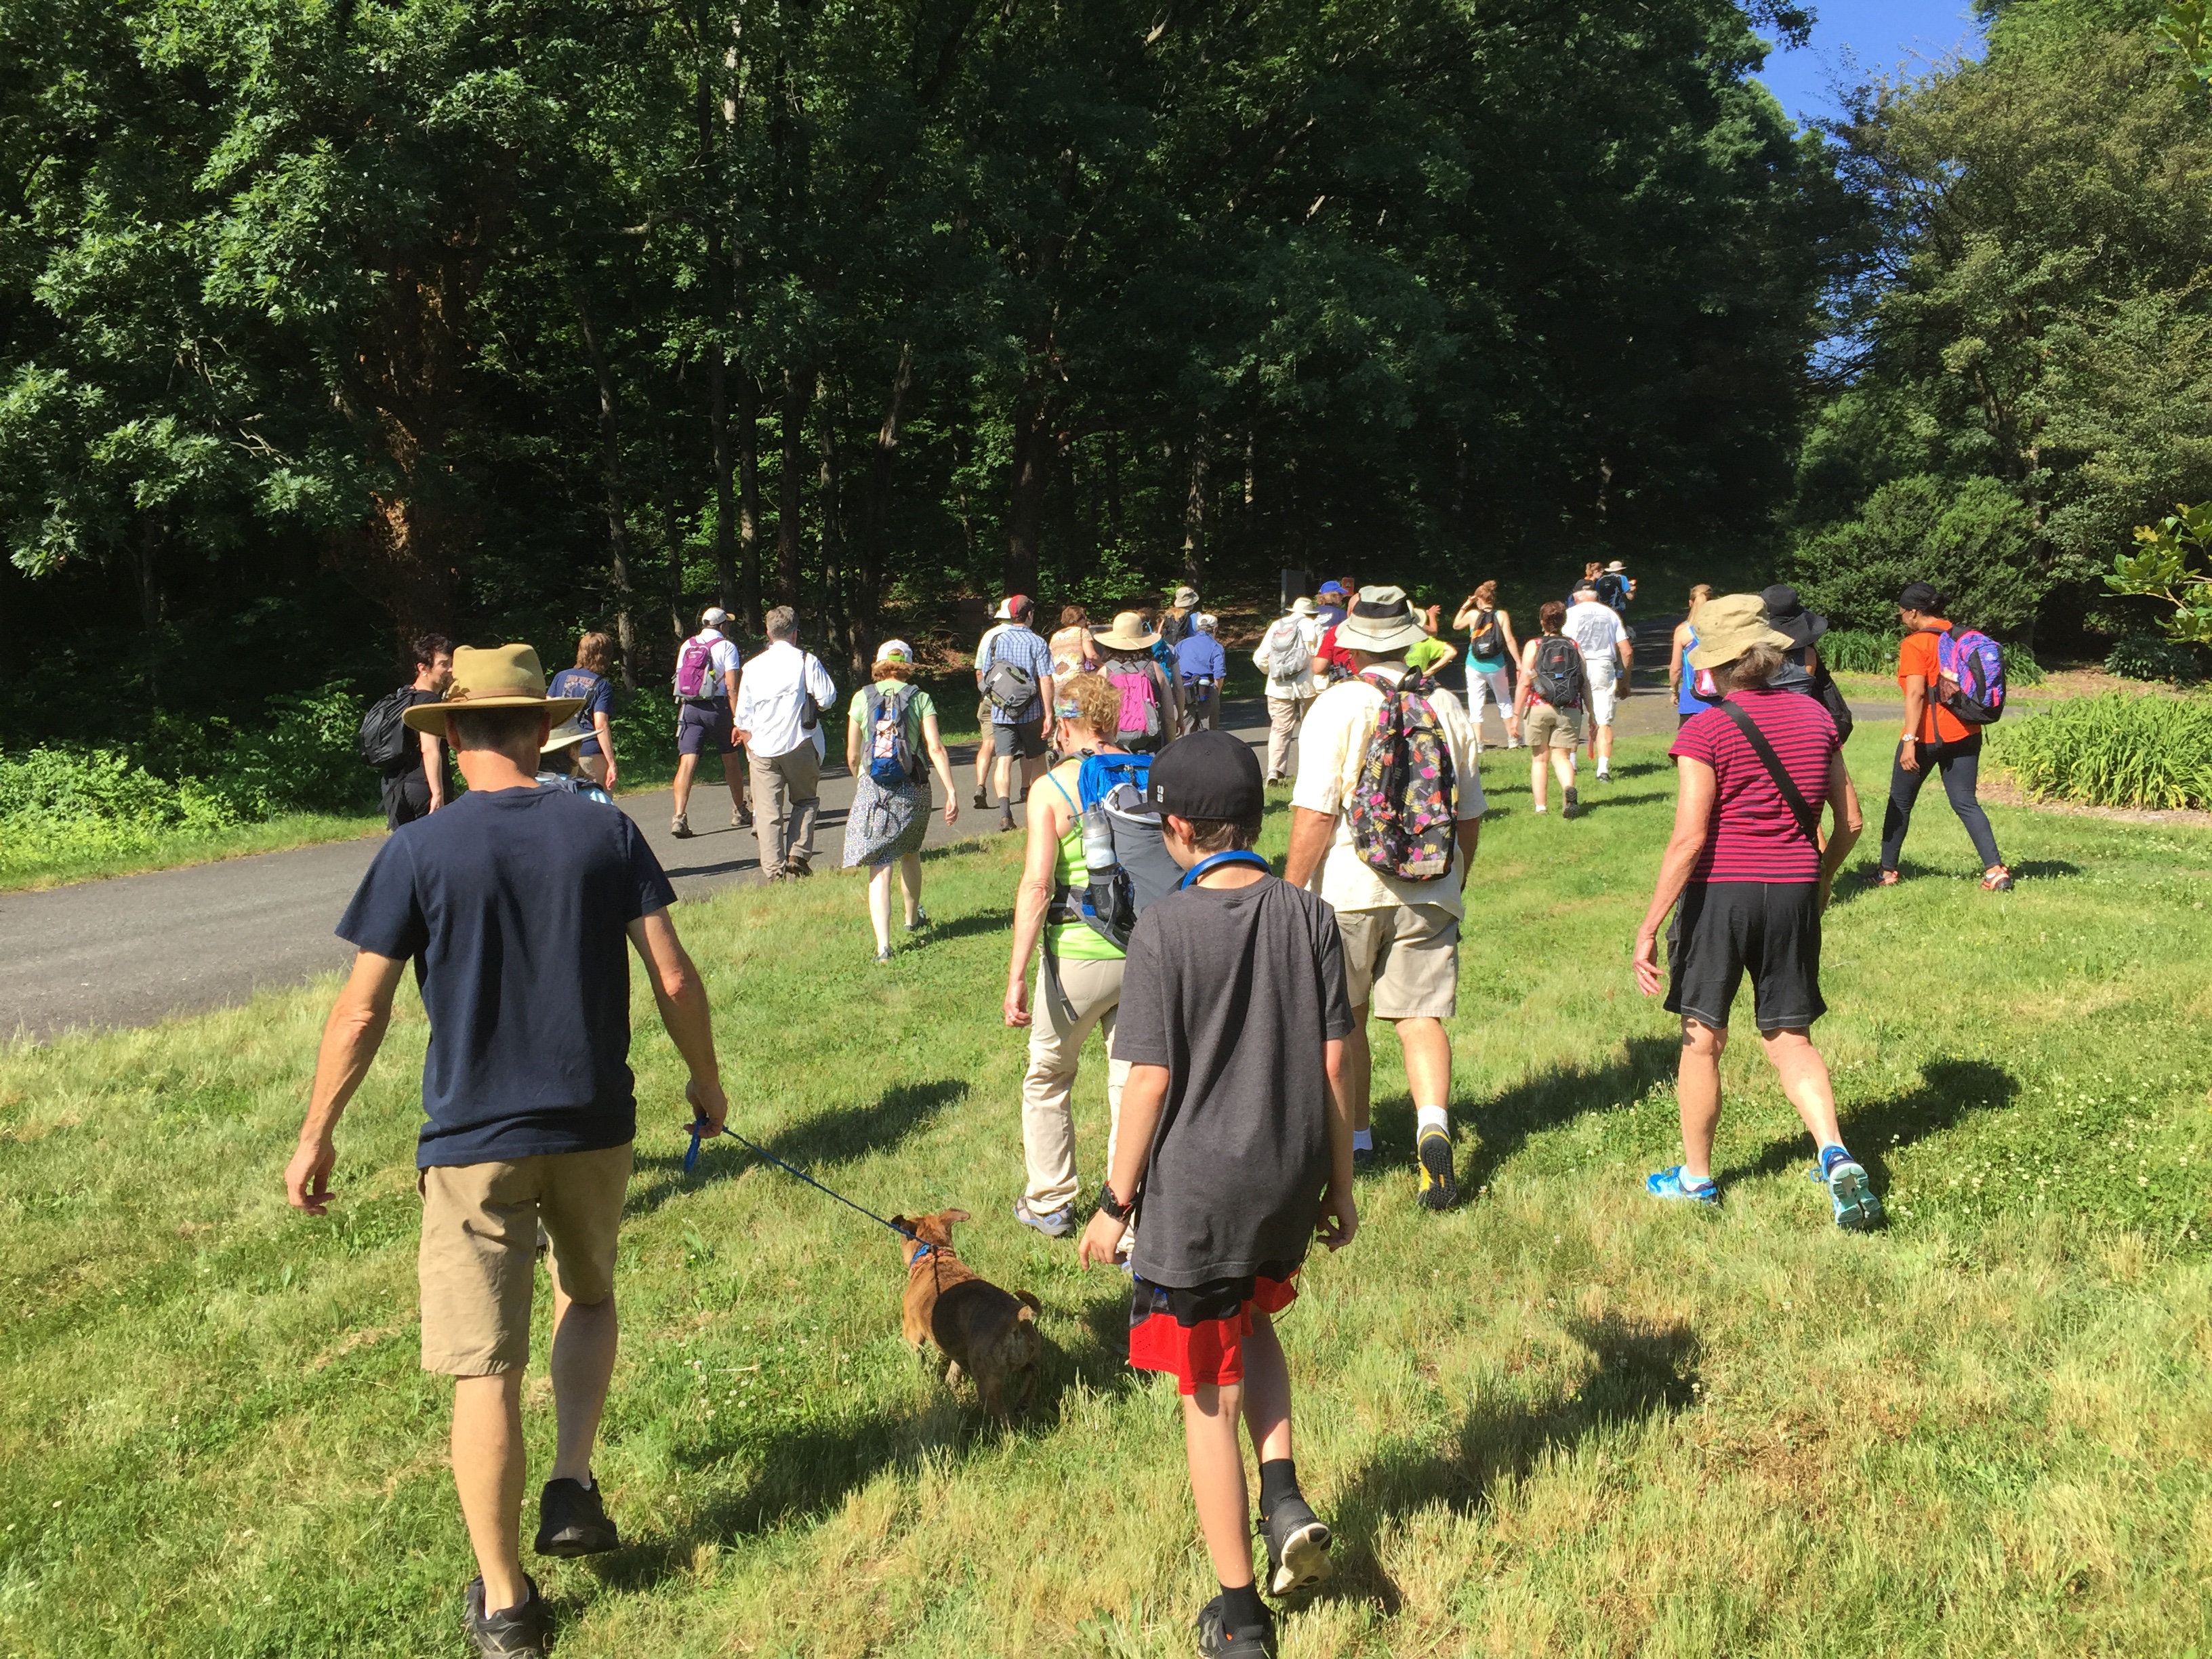 The hiking group starts out across the grass, heading for the tree